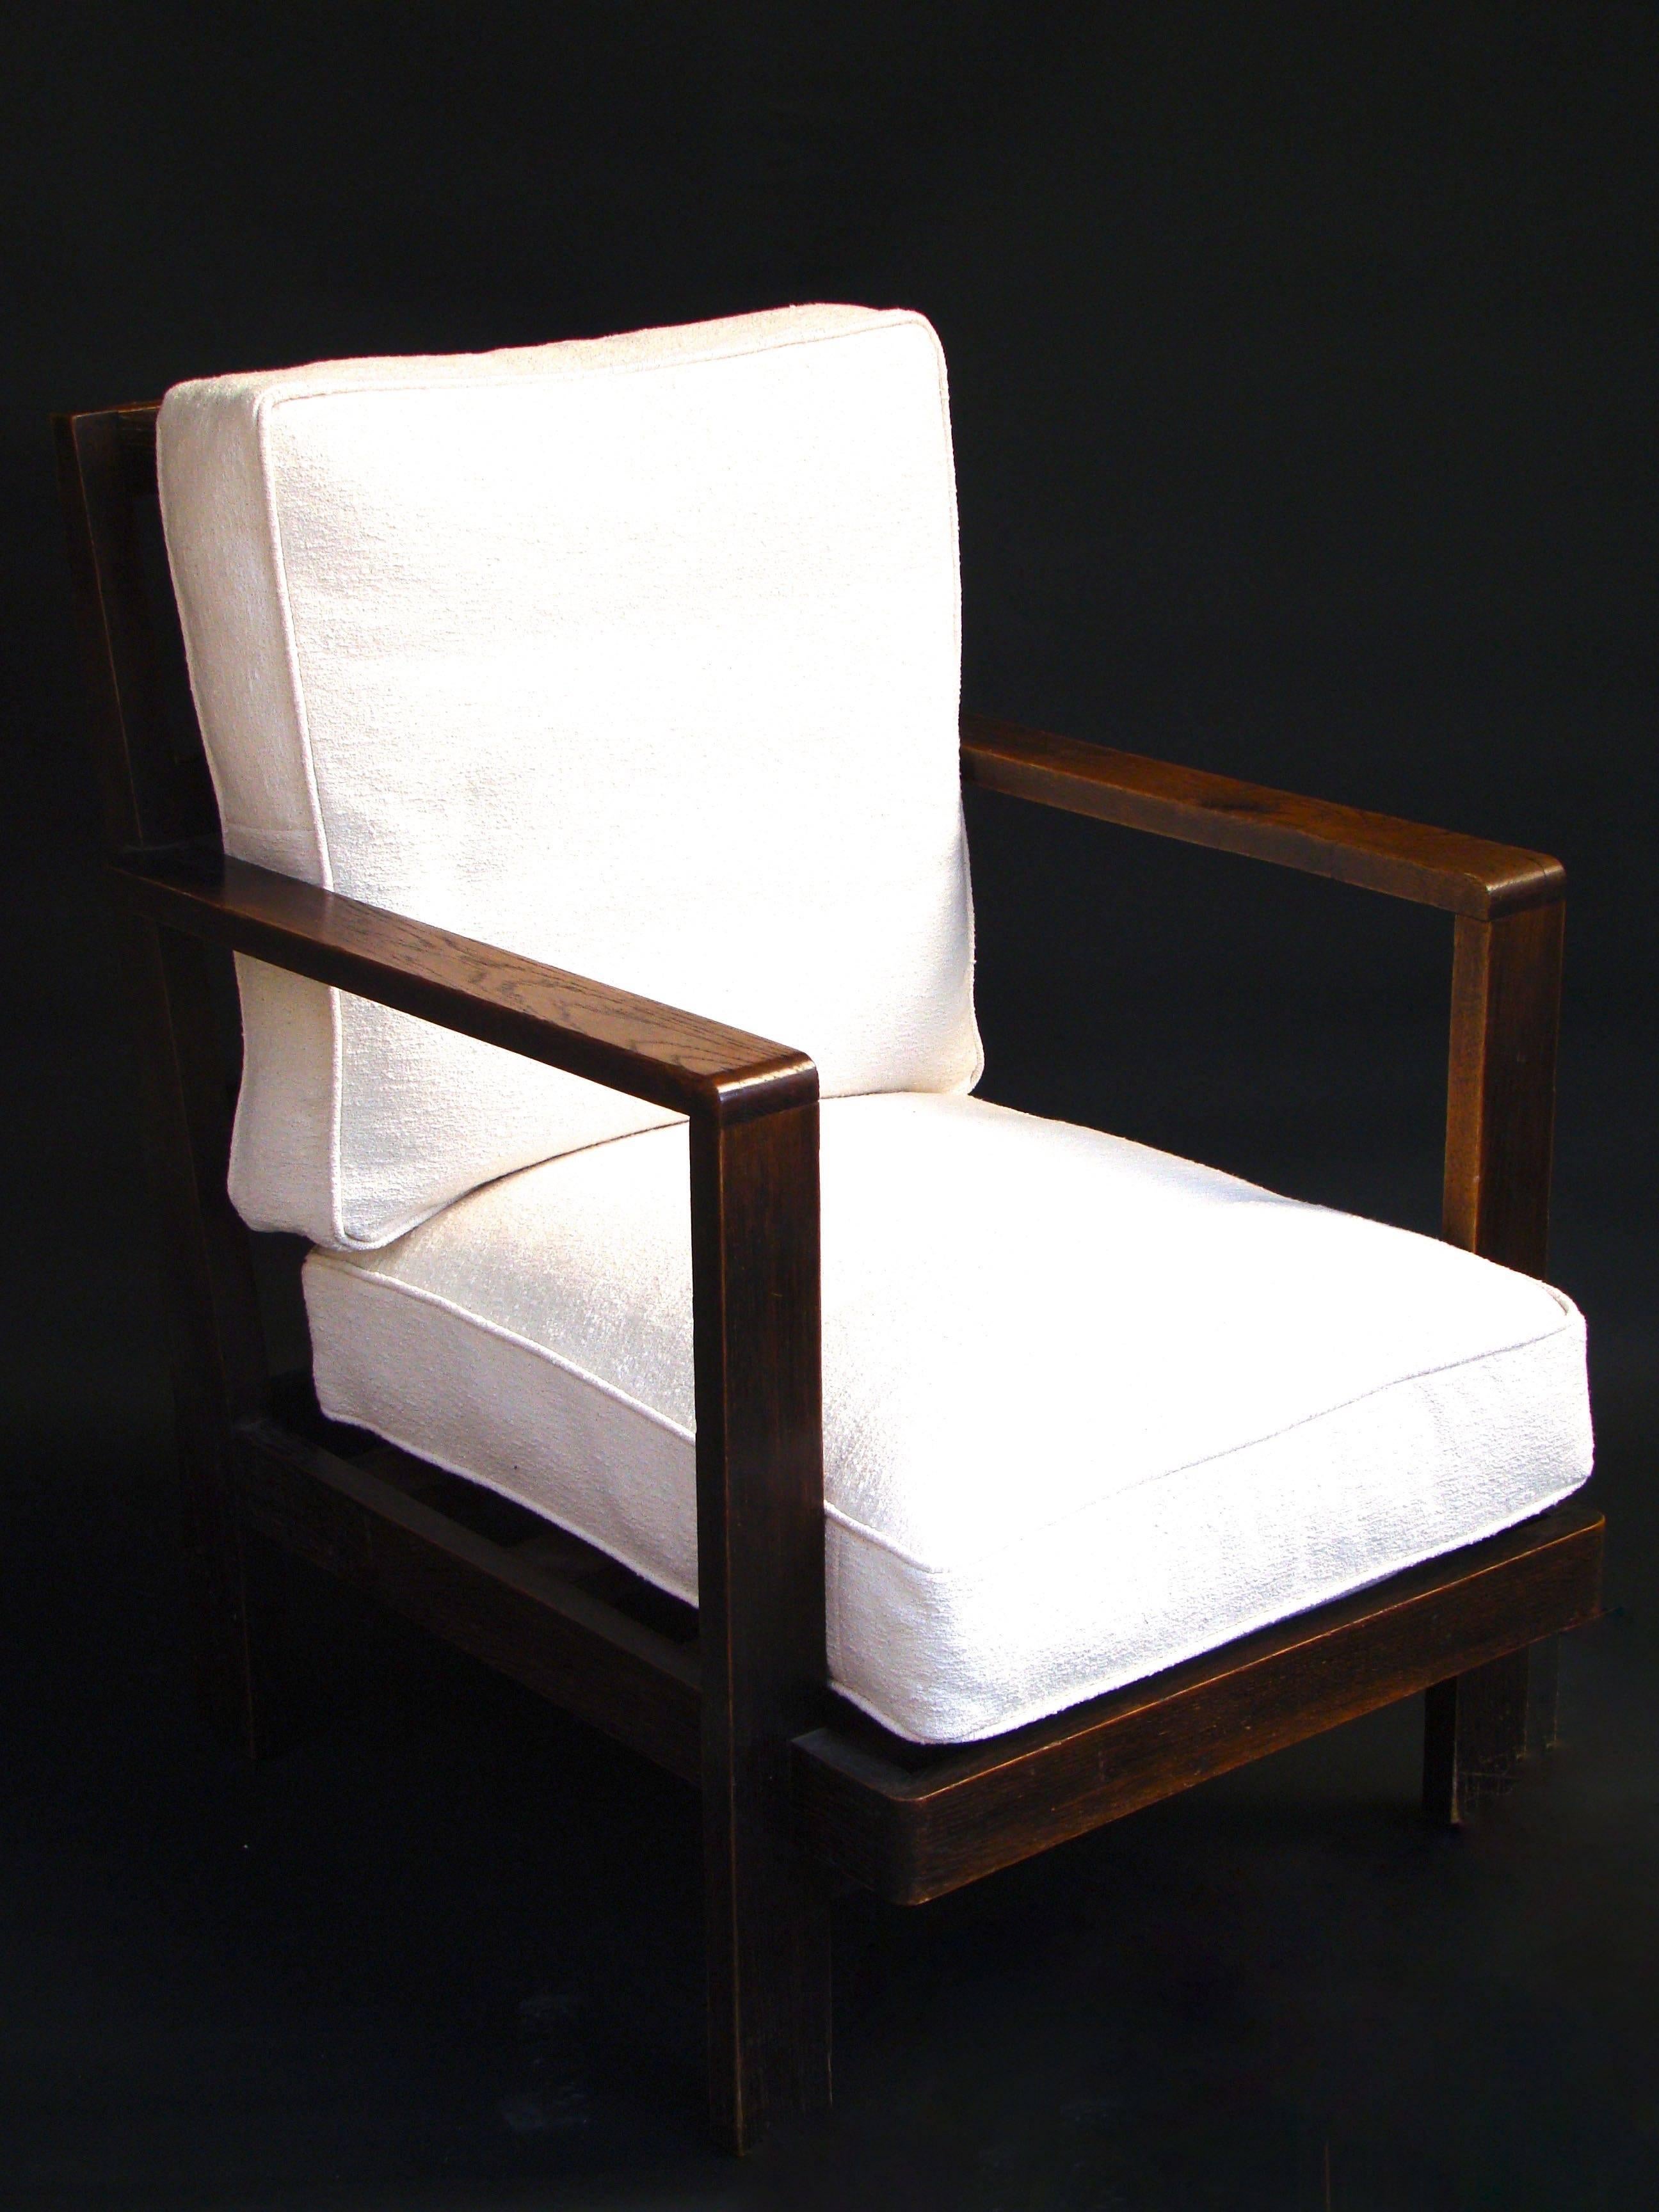 Handsome pair of oak tree and fabric armchairs, circa 1930.